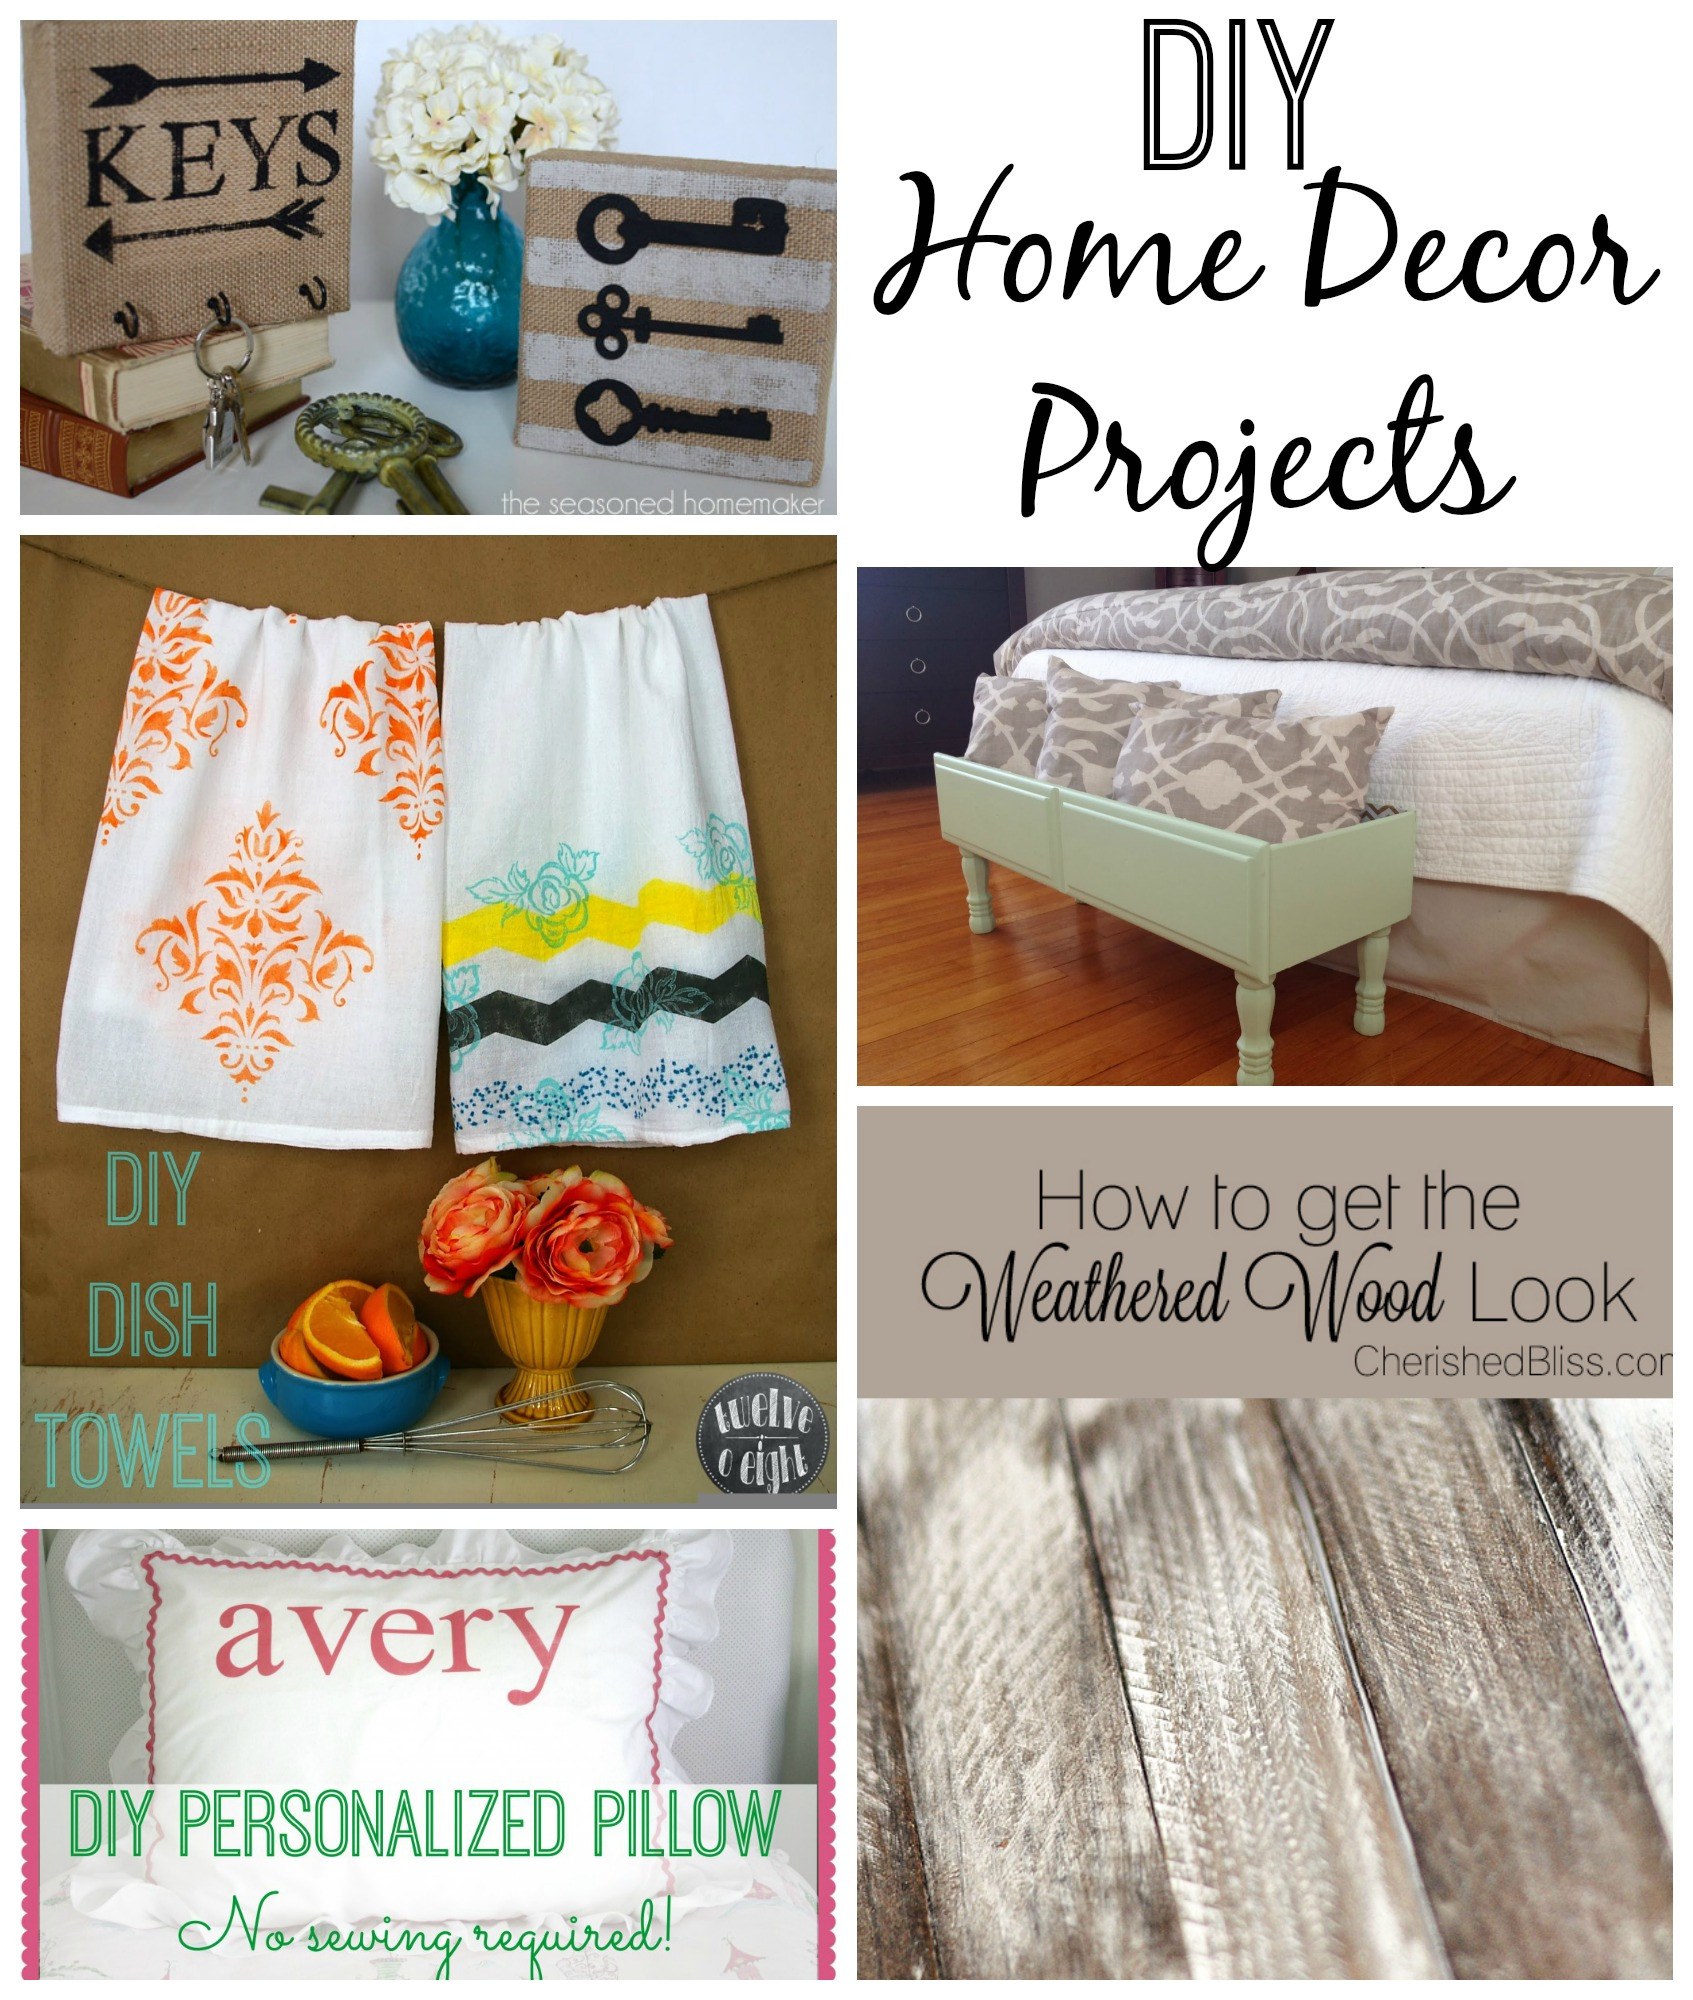 DIY Crafts Ideas For Home Decor
 DIY Home Decor Projects